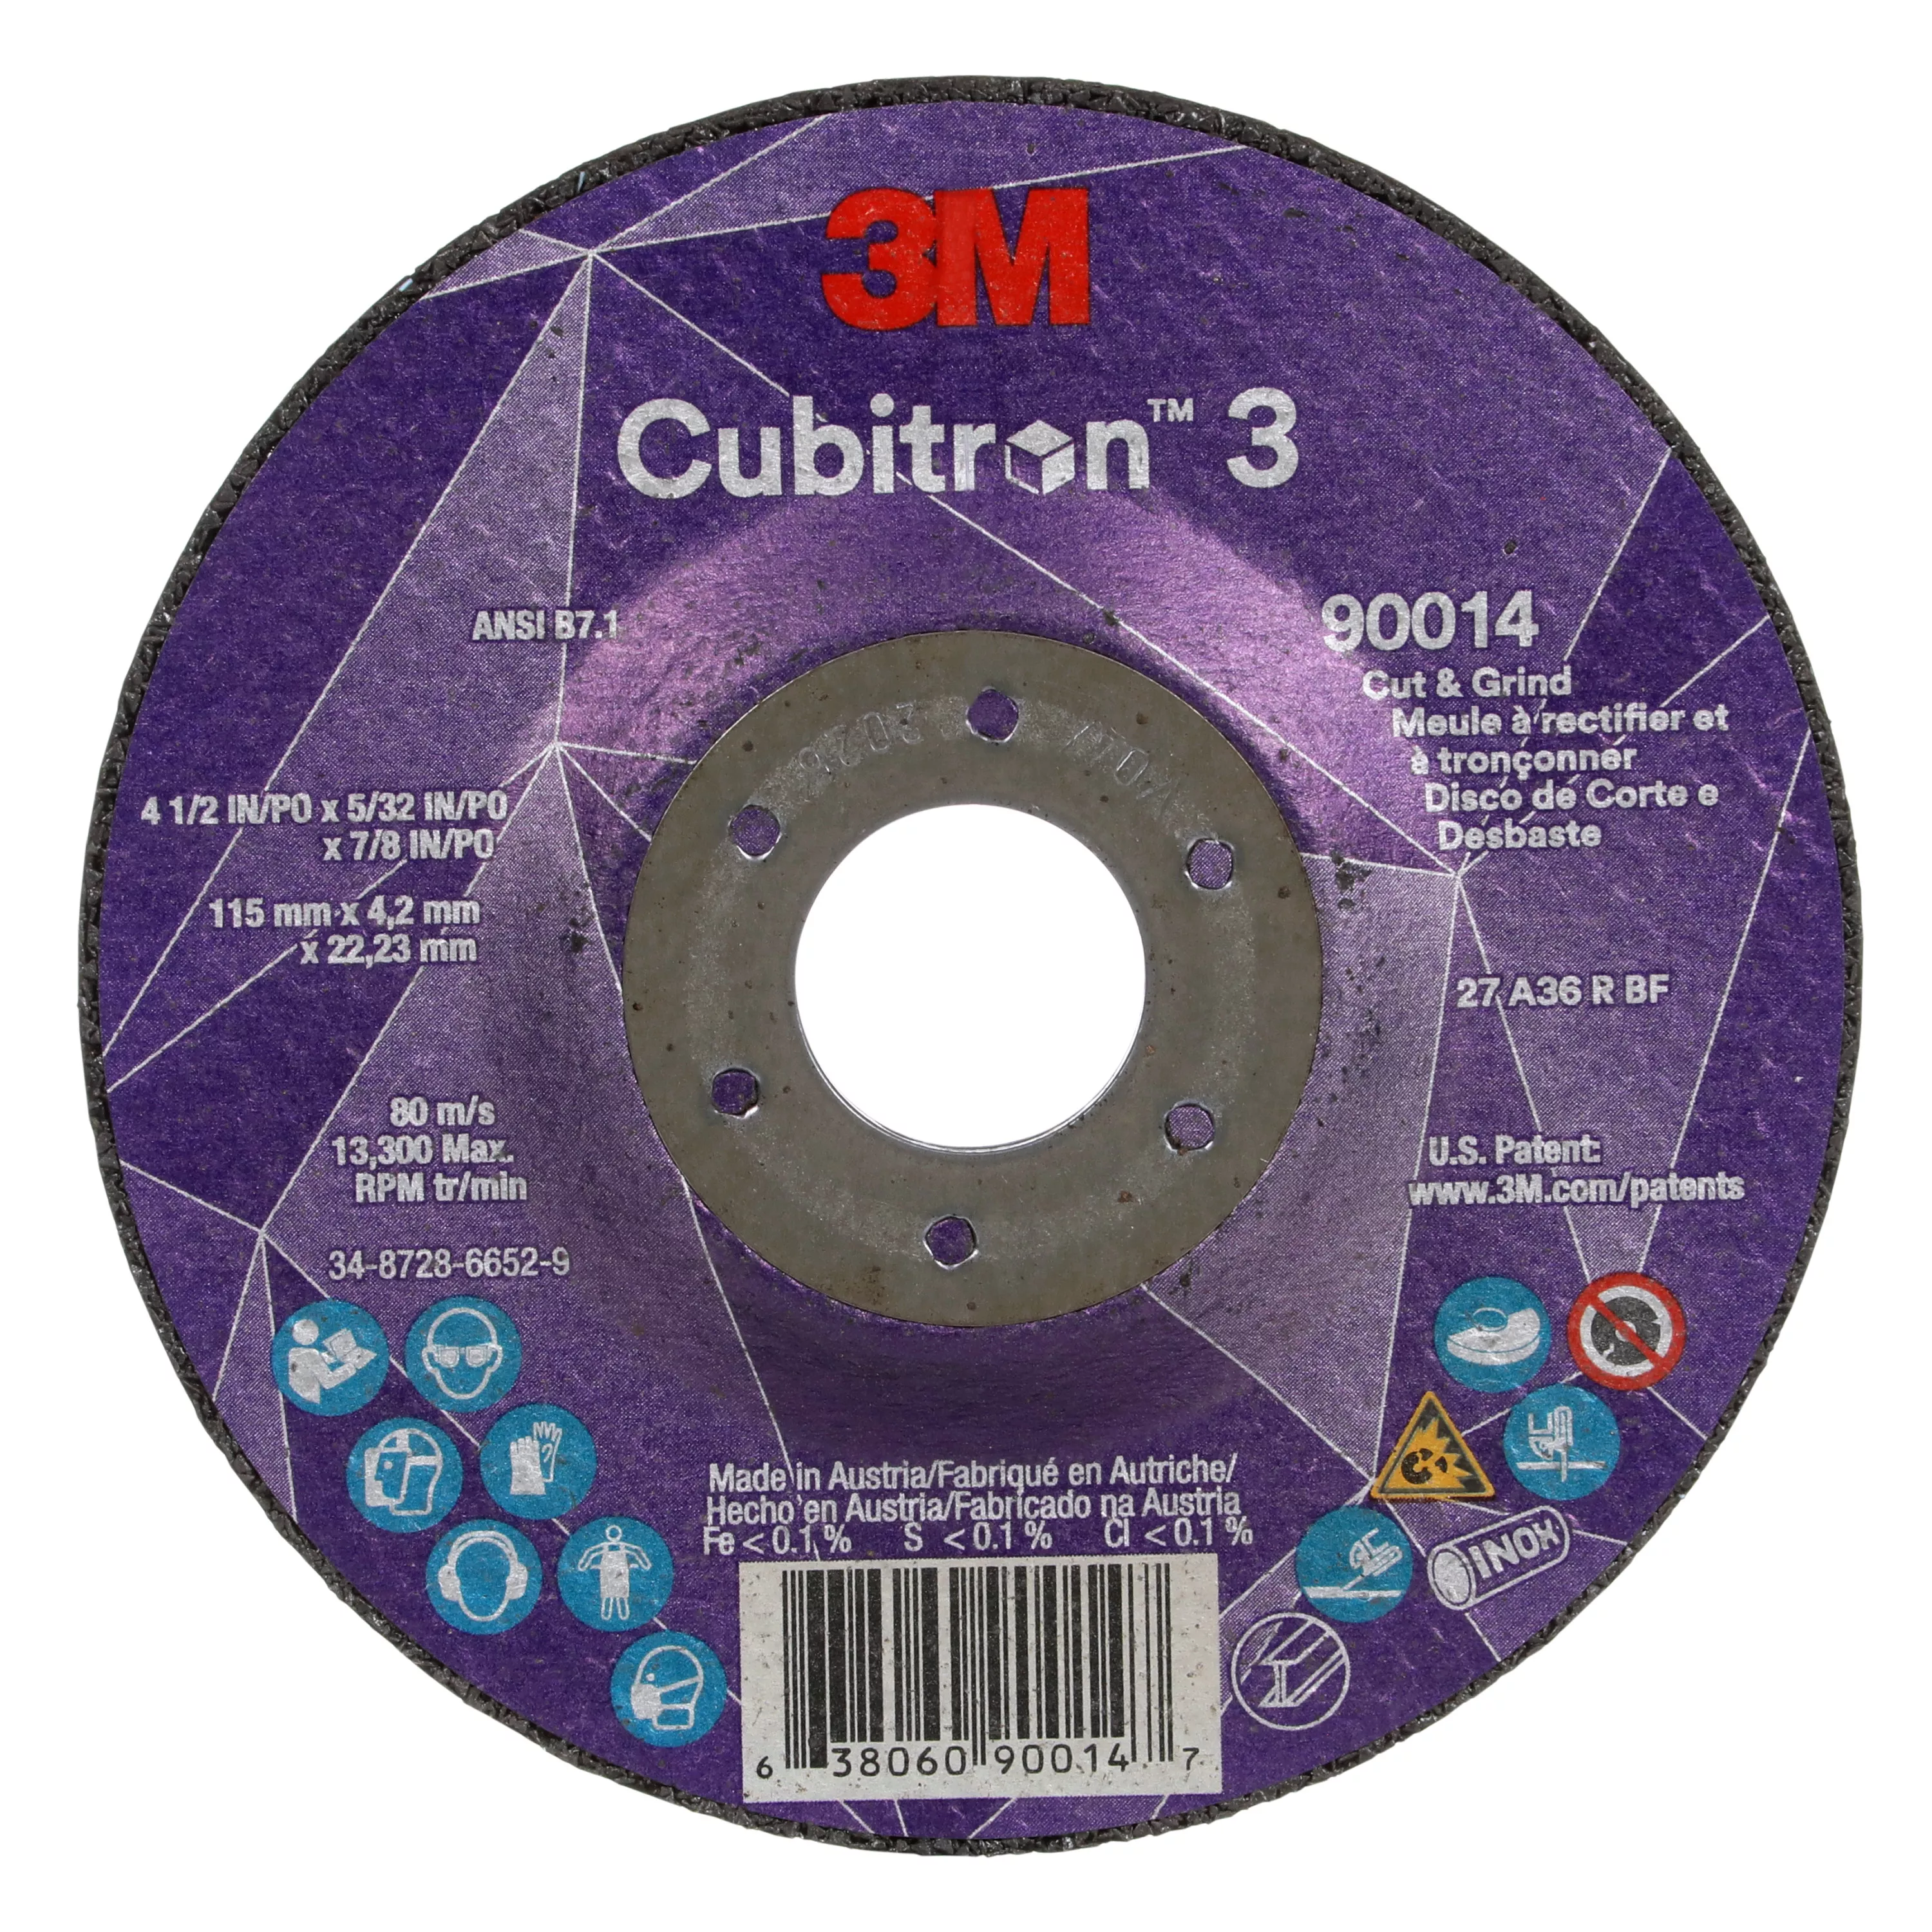 3M™ Cubitron™ 3 Cut and Grind Wheel, 90014, 36+, T27, 4-1/2 in x 5/32 in
x 7/8 in (115 x 4.2 x 22.23 mm) ANSI, 10/Pack, 20 ea/Case